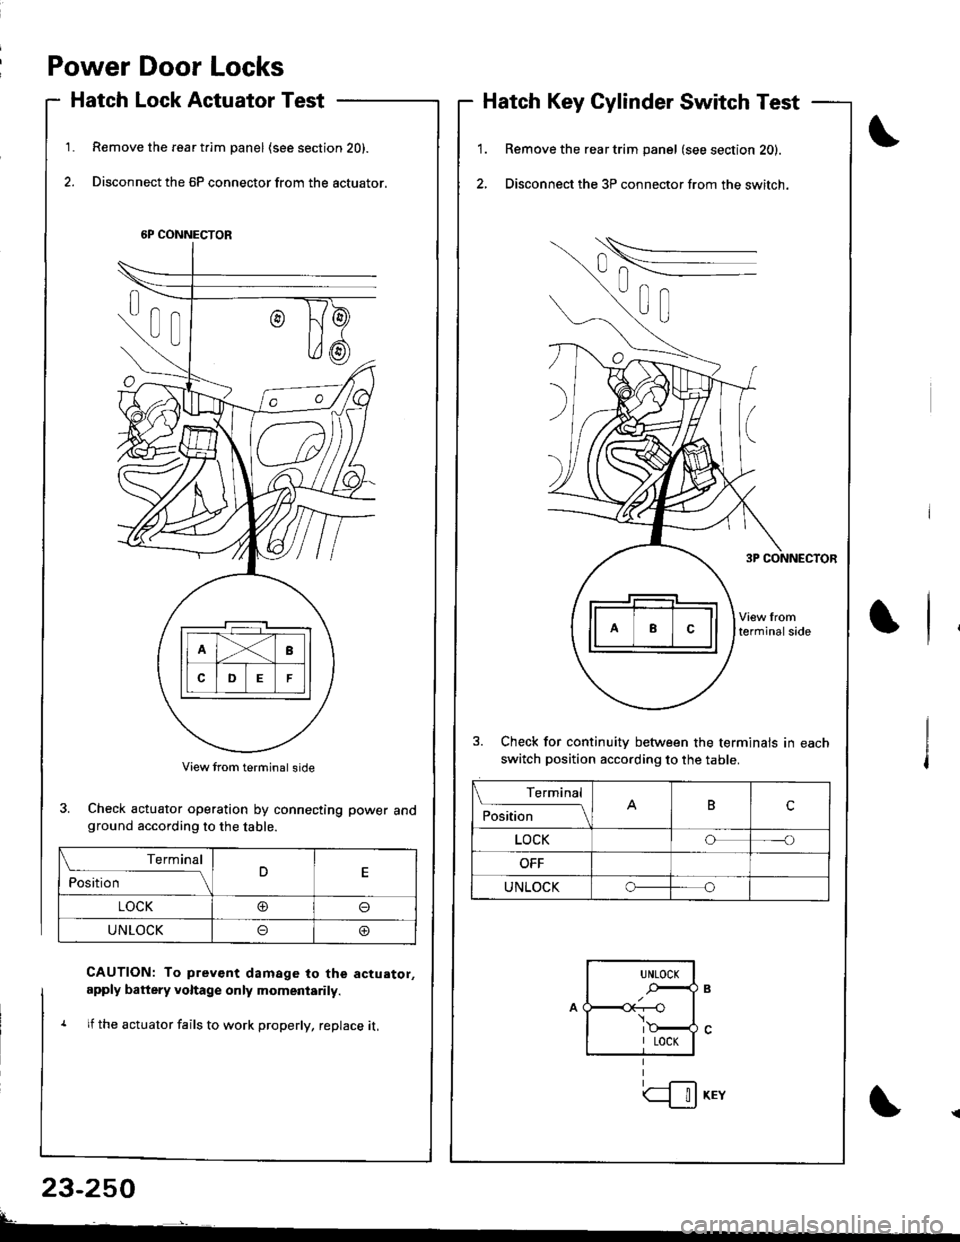 HONDA INTEGRA 1998 4.G Workshop Manual Power Door Locks
Hatch Lock Actuator Test
Remove the rear t.im panel (see section 20).
Disconnect the 6P connector from the actuator.
1.1.
2.
Hatch Key Cylinder Switch Test
Remove the rear trim panel 